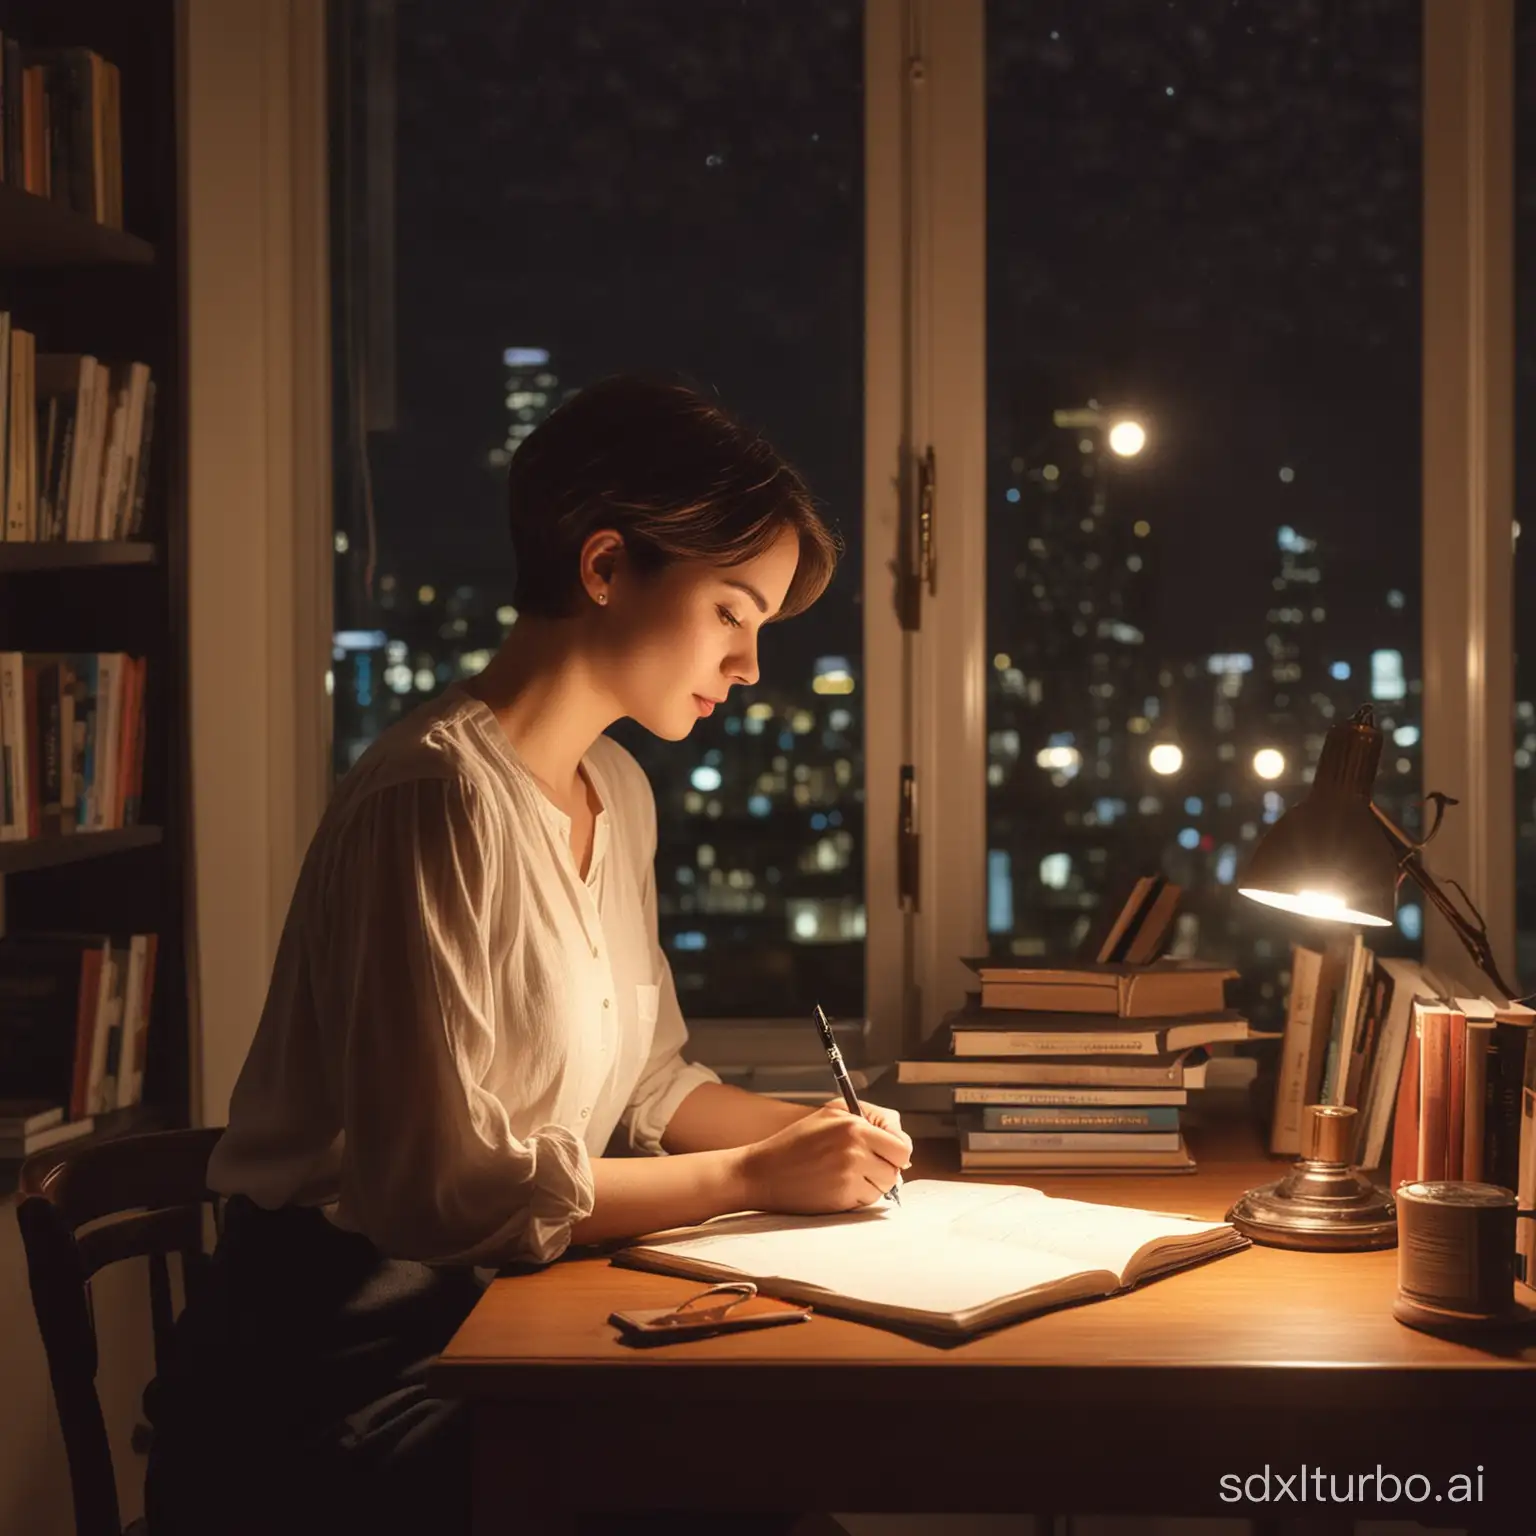 Woman-Writing-by-Window-at-Night-with-Lamp-and-Books